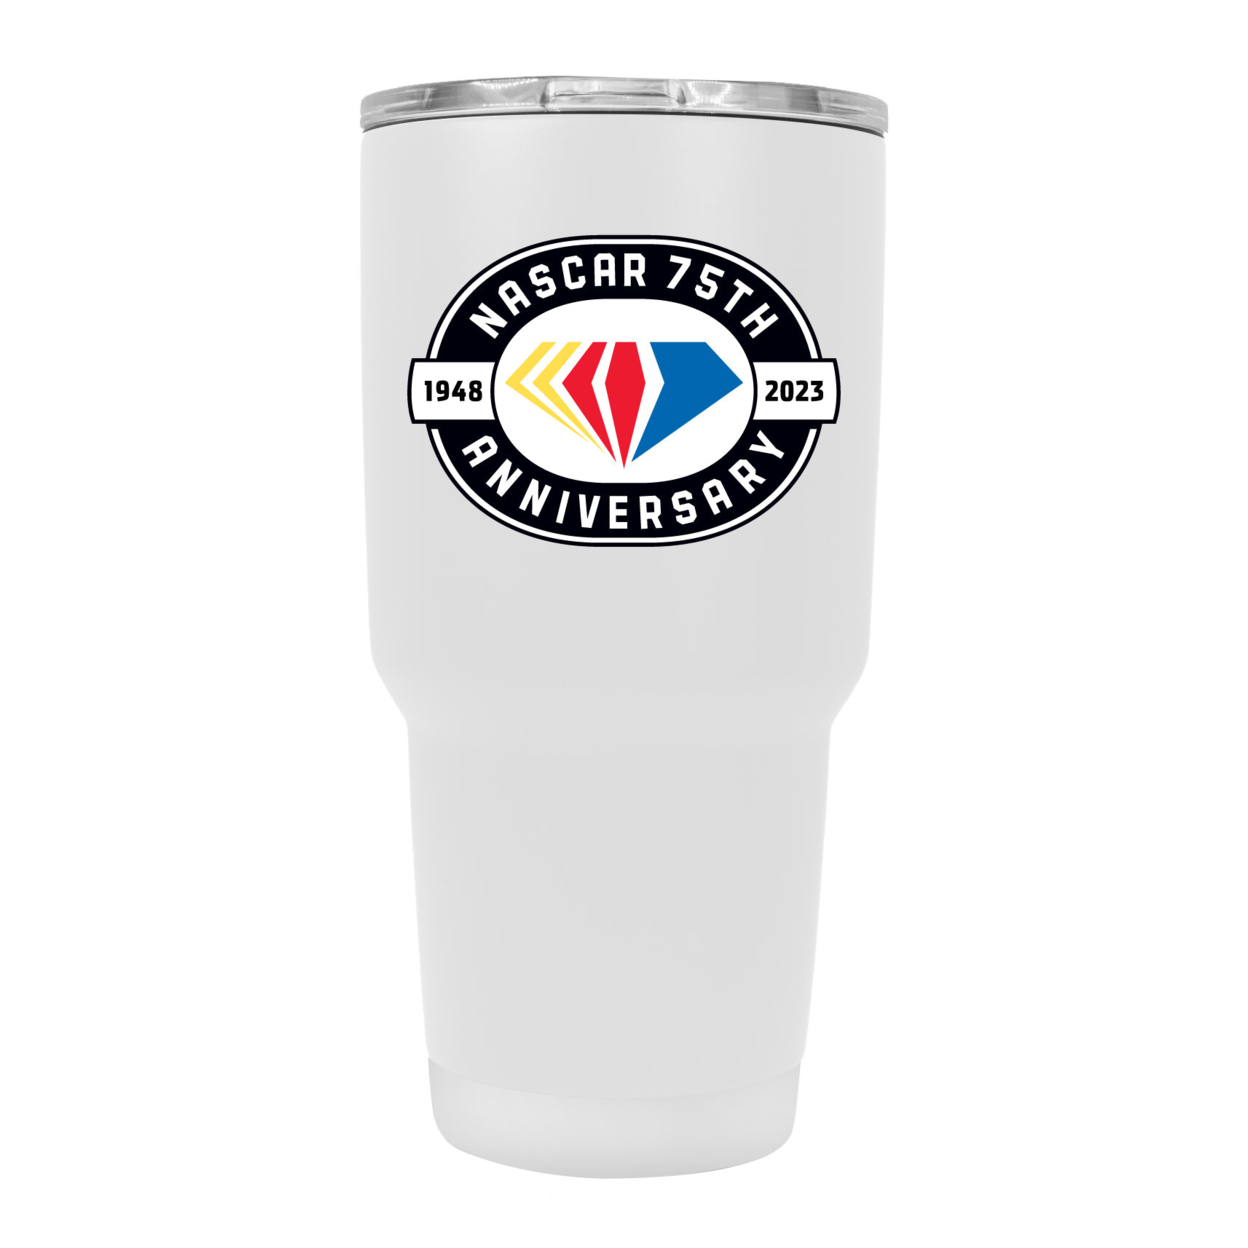 NASCAR 75 Year Anniversary Officially Licensed 24oz Stainless Steel Tumbler - White